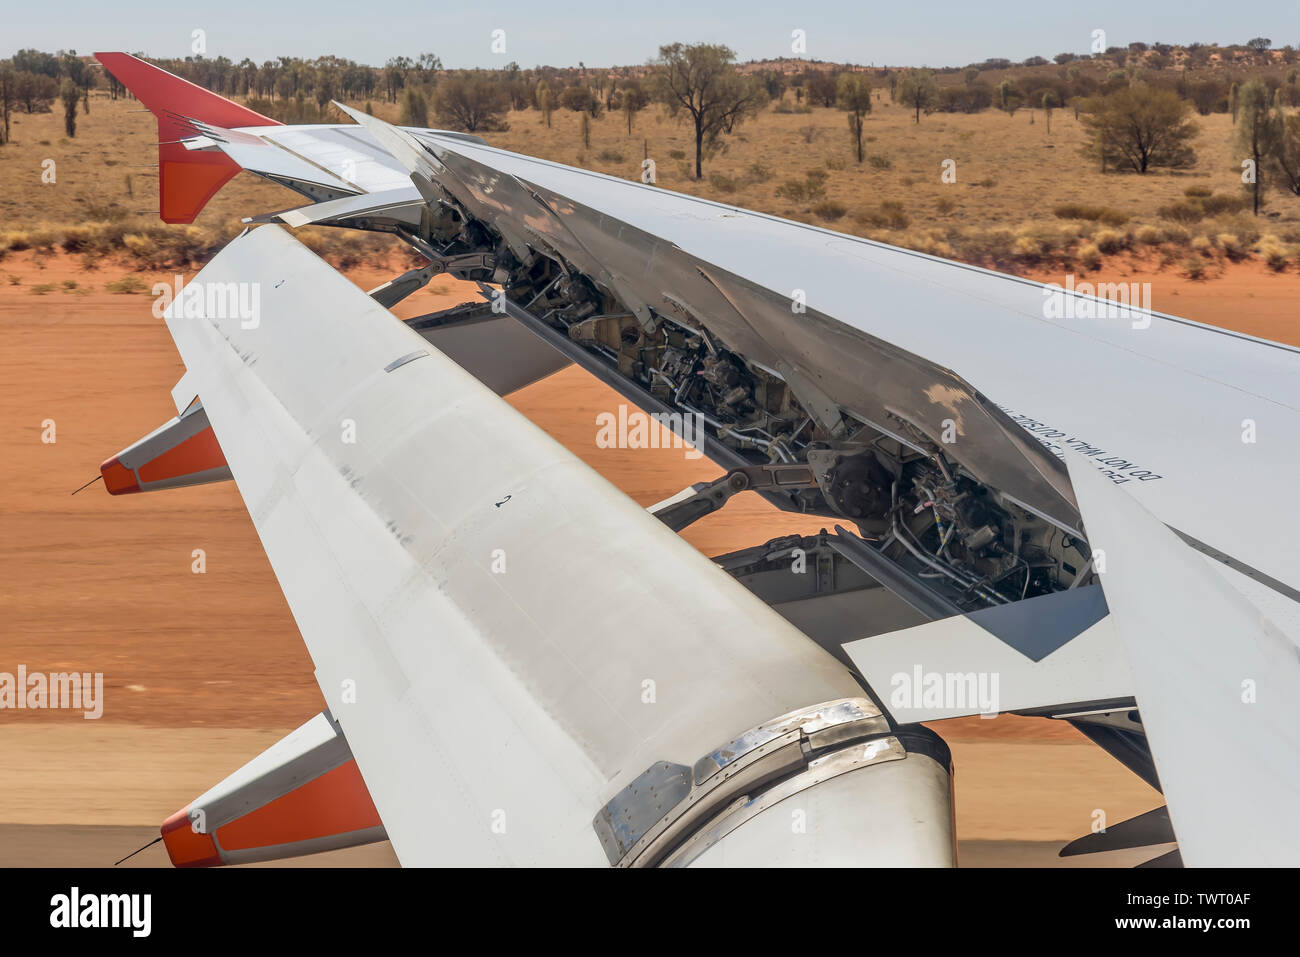 Airplane activates ground spoilers as it lands at Ayers Rock airport, Australia Stock Photo